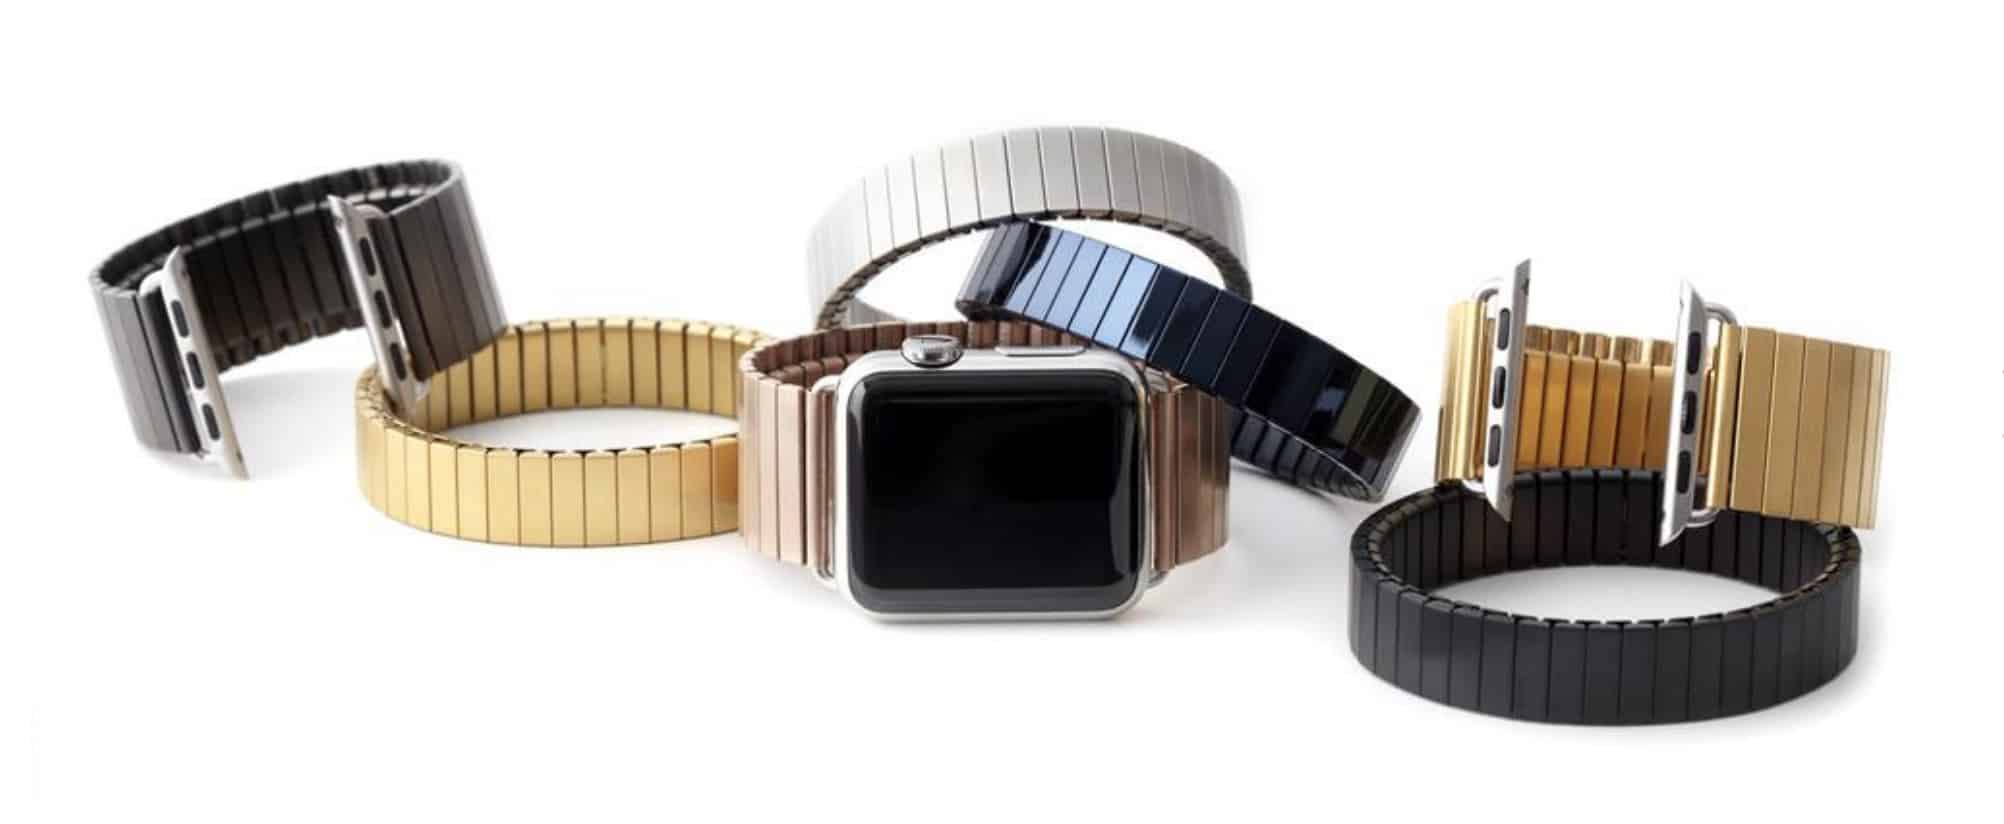 Rilee & Lo spices up your Apple Watch with sexy, sleek stainless steel watch bands.